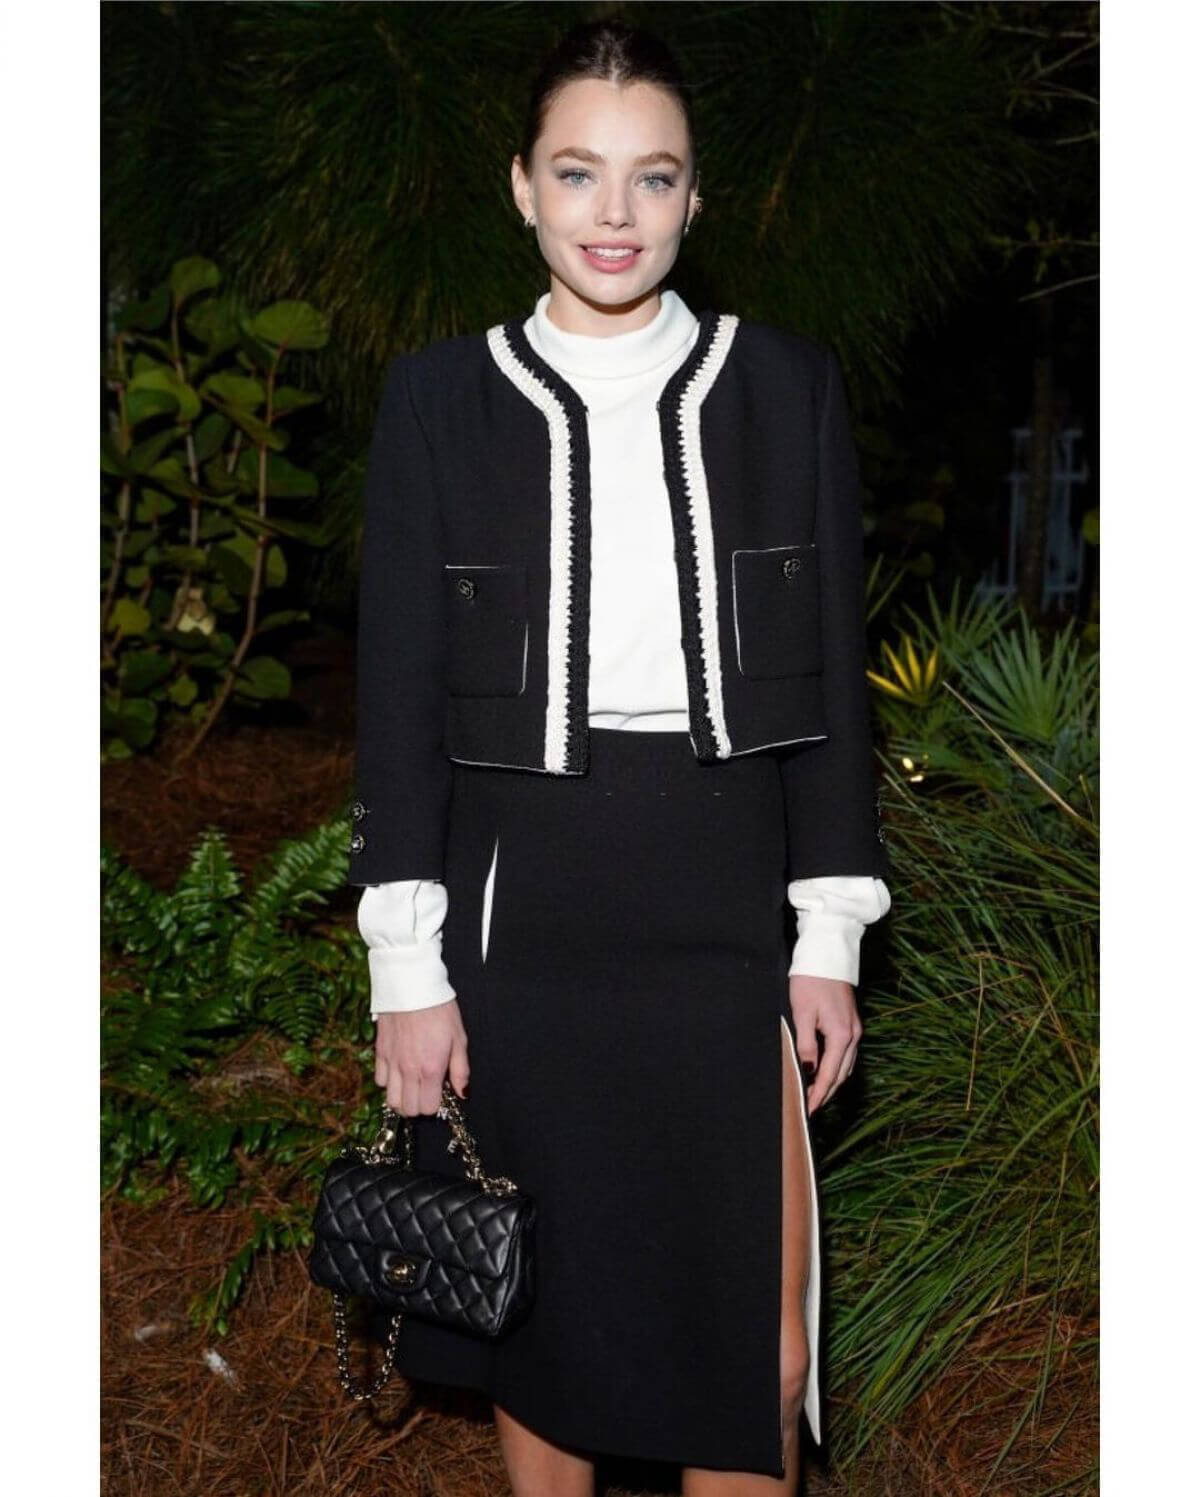 Kristine Froseth in Black and White Outfit at Chanel Dinner to Celebrate Five Echoes in Miami 6